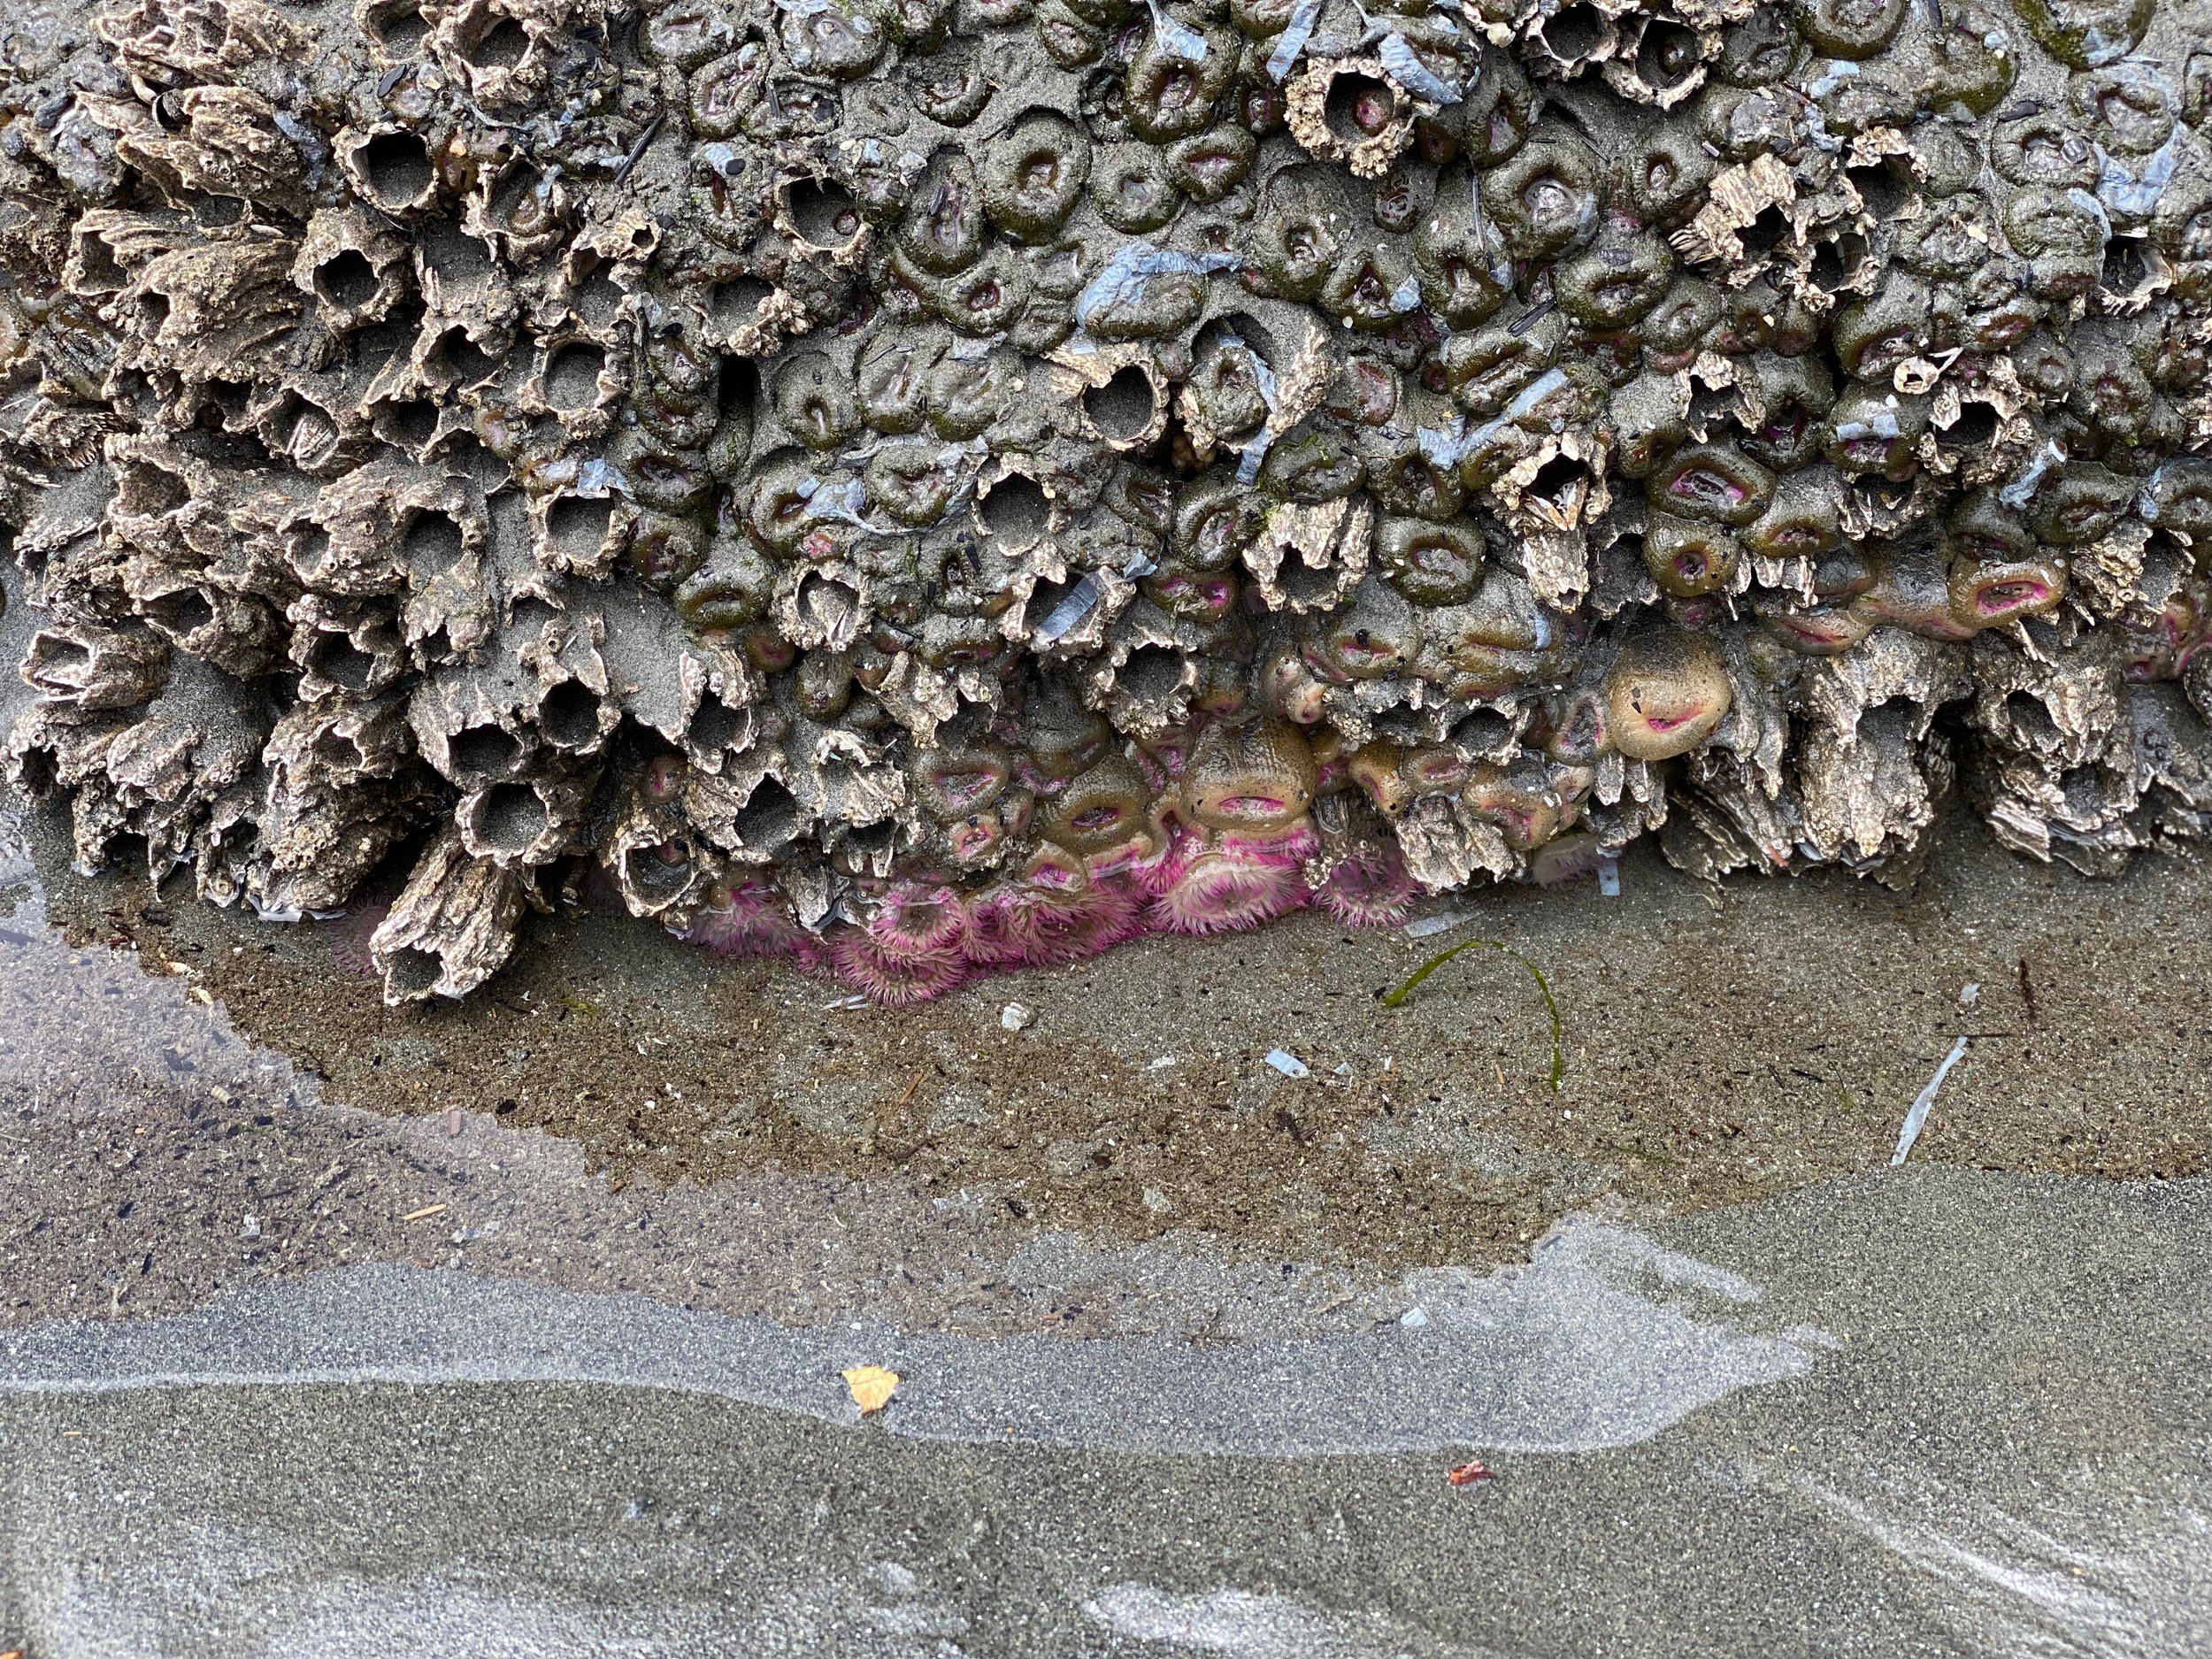 Pink sea anemones were less common sightings